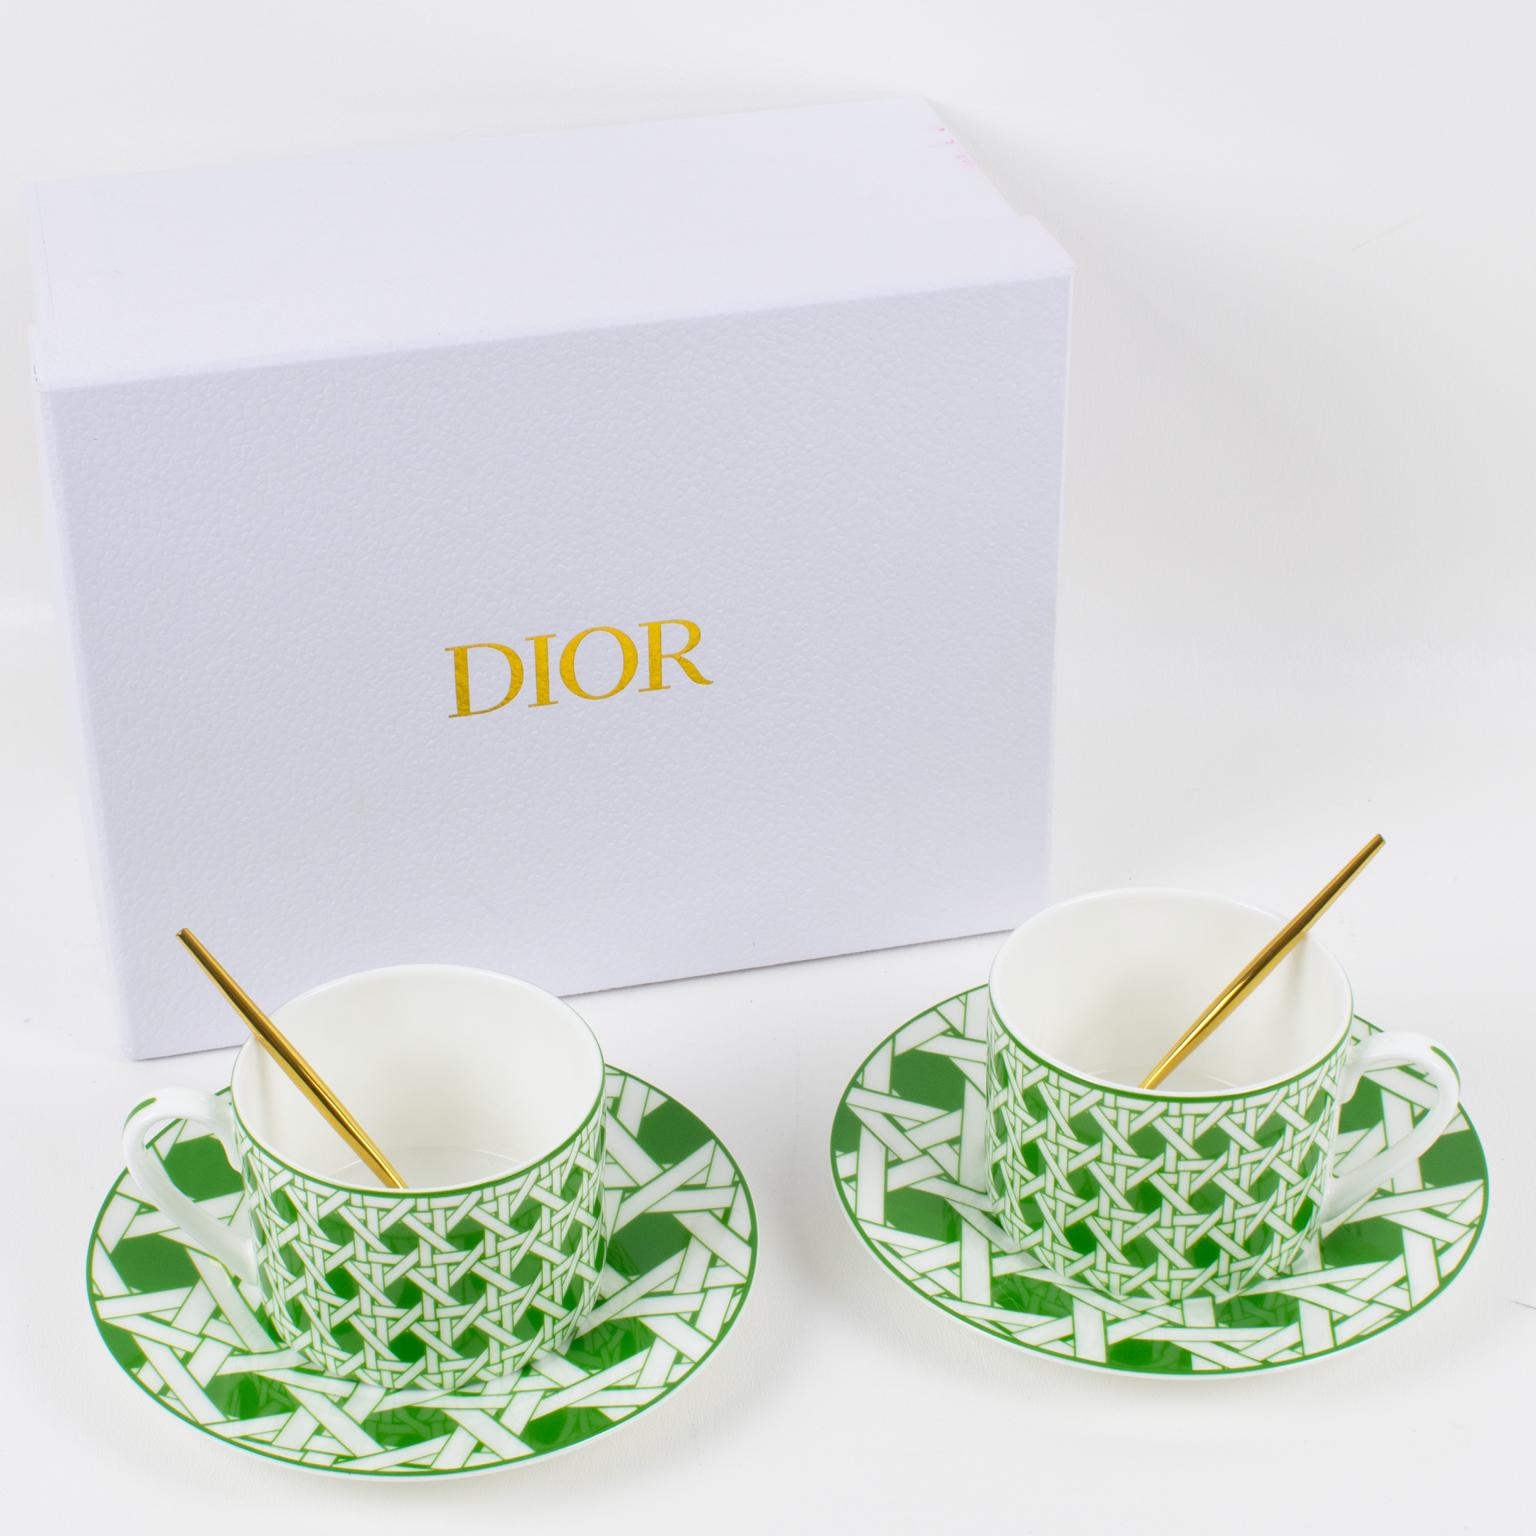 So lovely tea/coffee for two set by Christian Dior Home Collection. In its original branded gift box, the fine porcelain set features six pieces: 2 cups, 2 saucers, and 2 gilt metal teaspoons. Hand-painted iconic cane-work design that Christian Dior